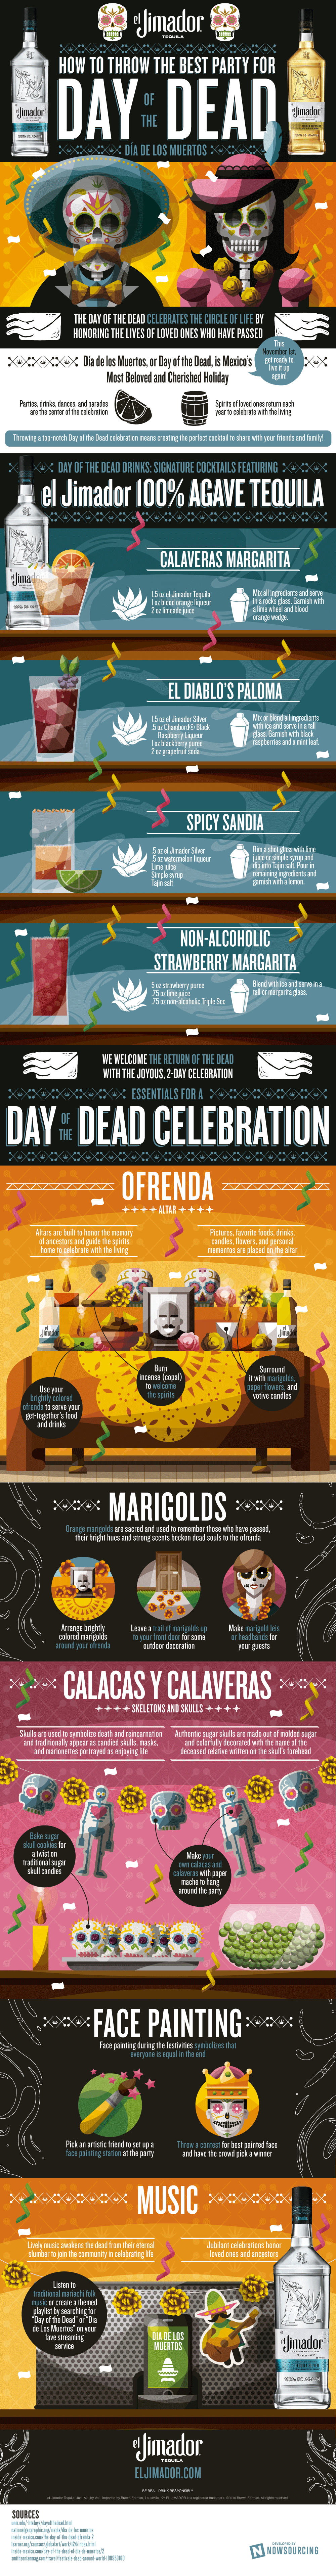 El Jimidor Day of the Dead Infographic